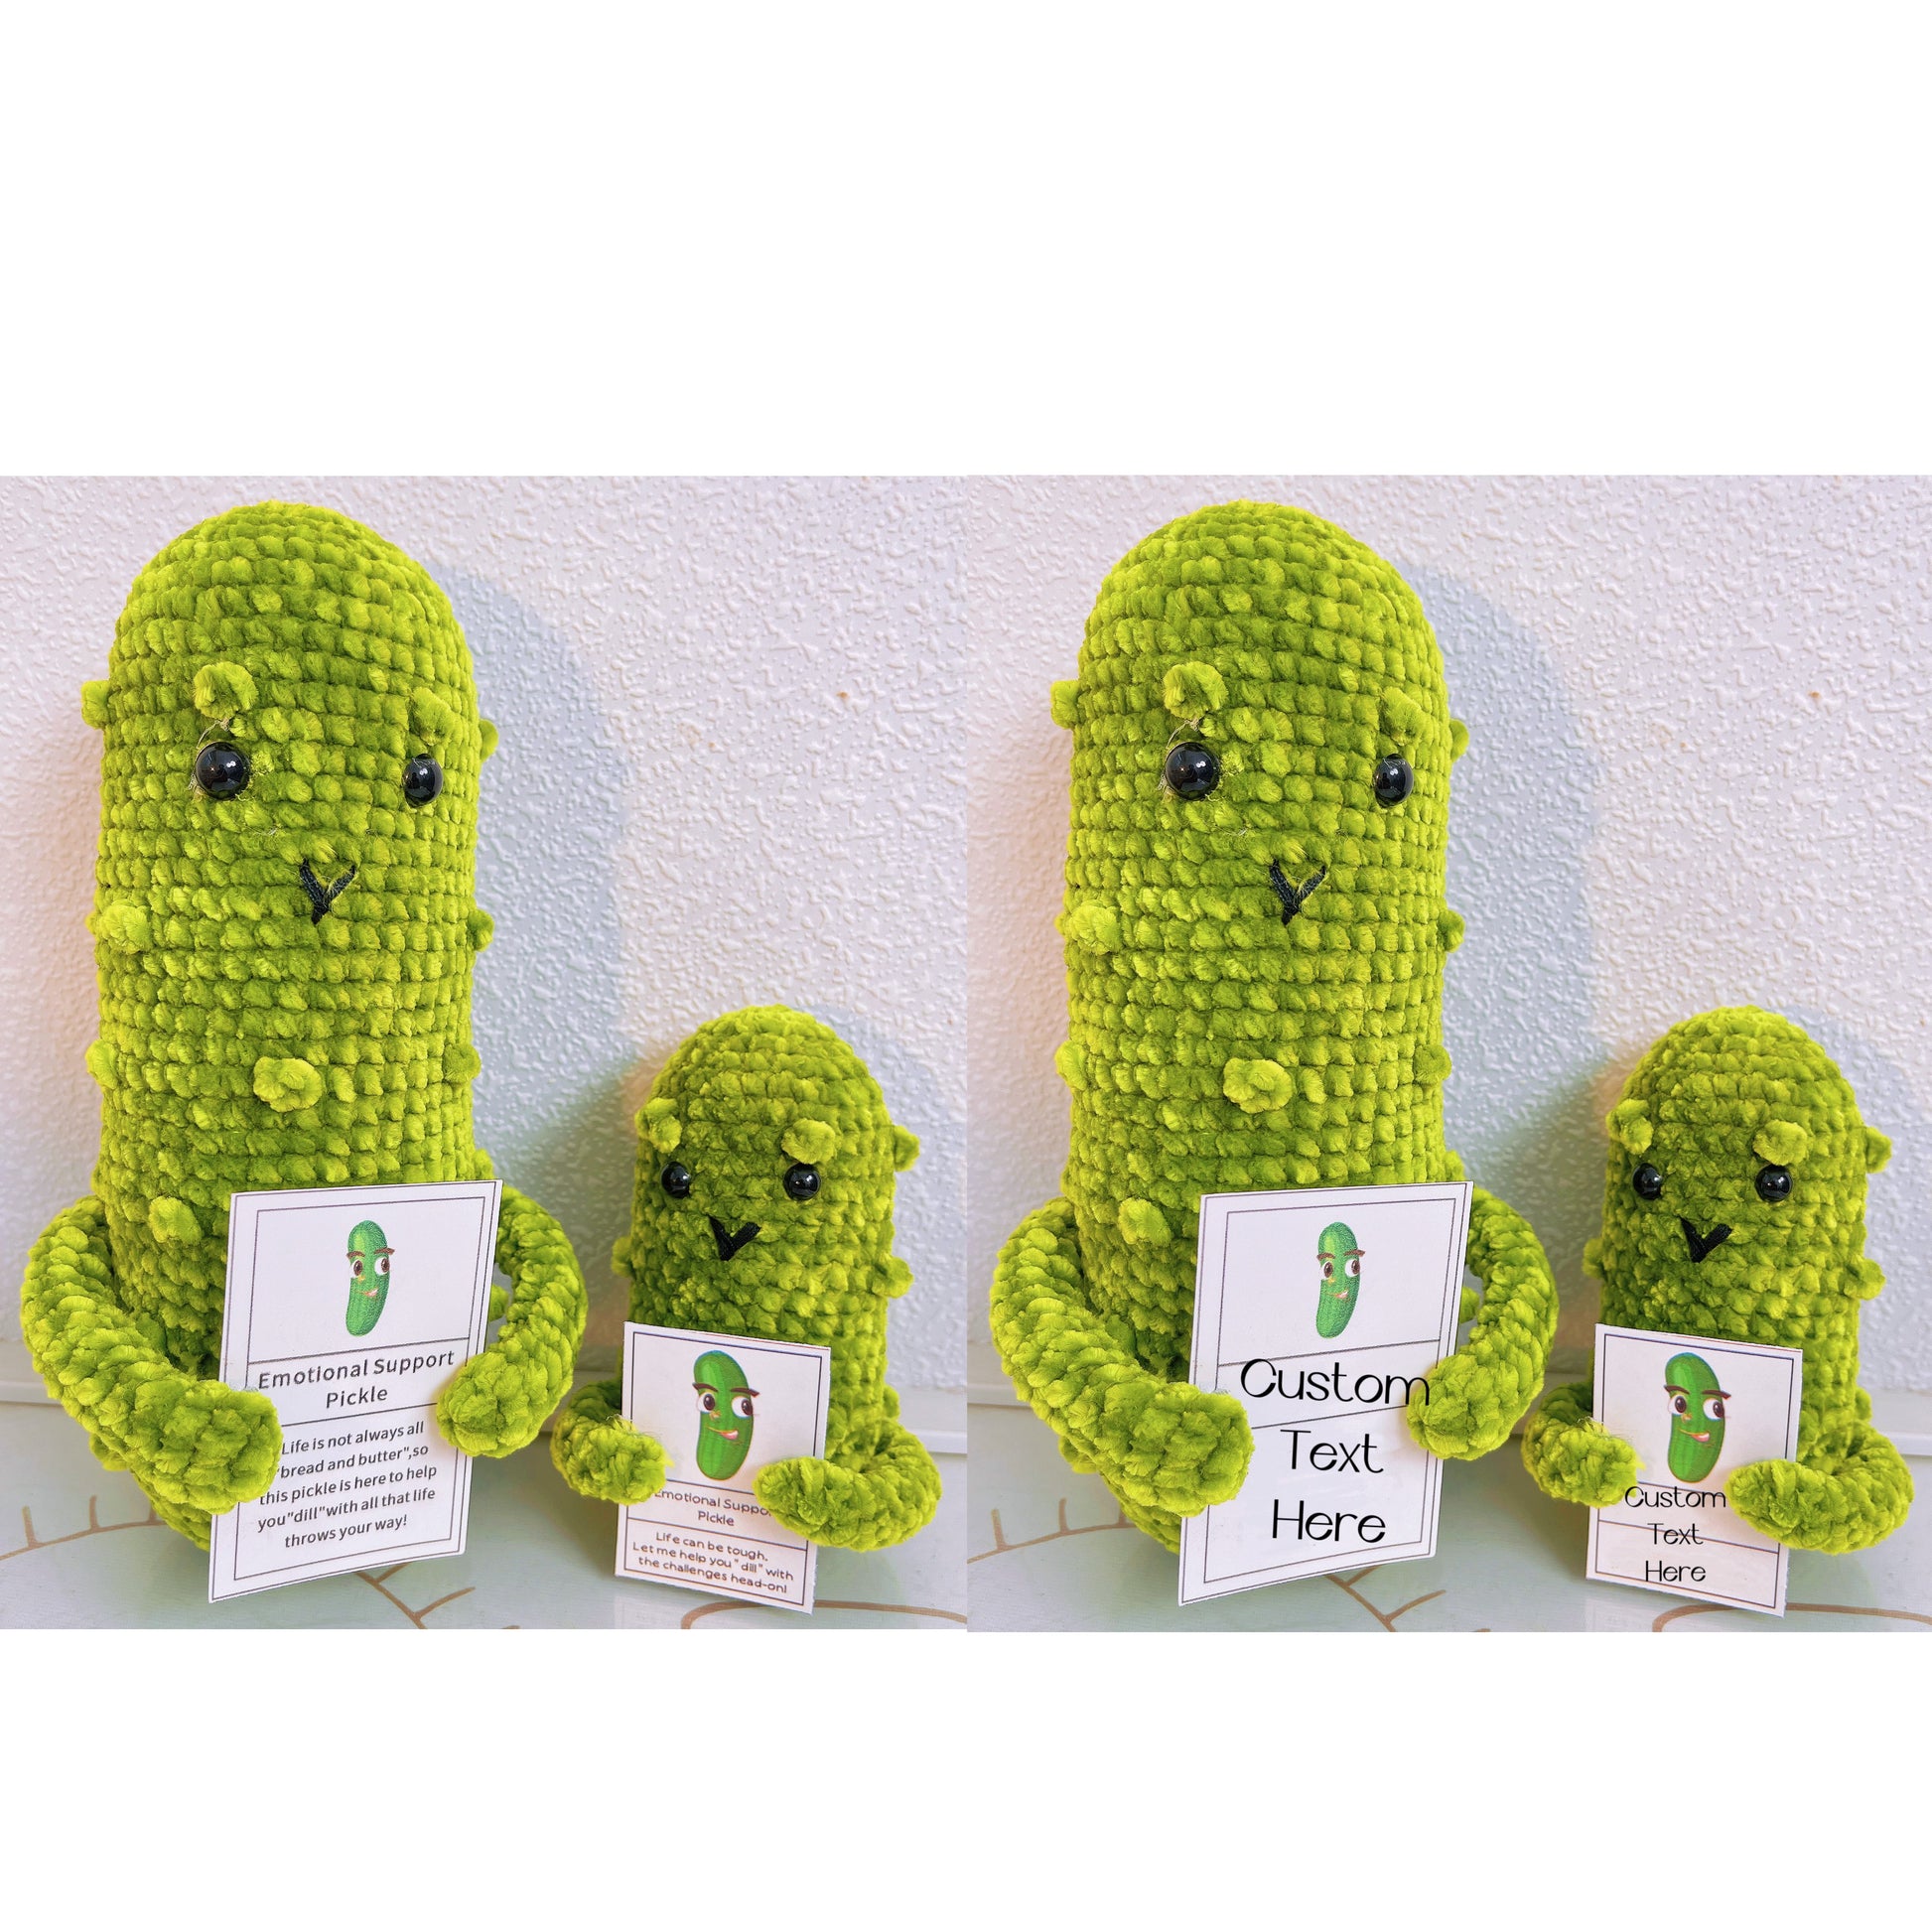 Handmade Emotional Support Pickled Cucumber Gift,Crochet Emotional Supports